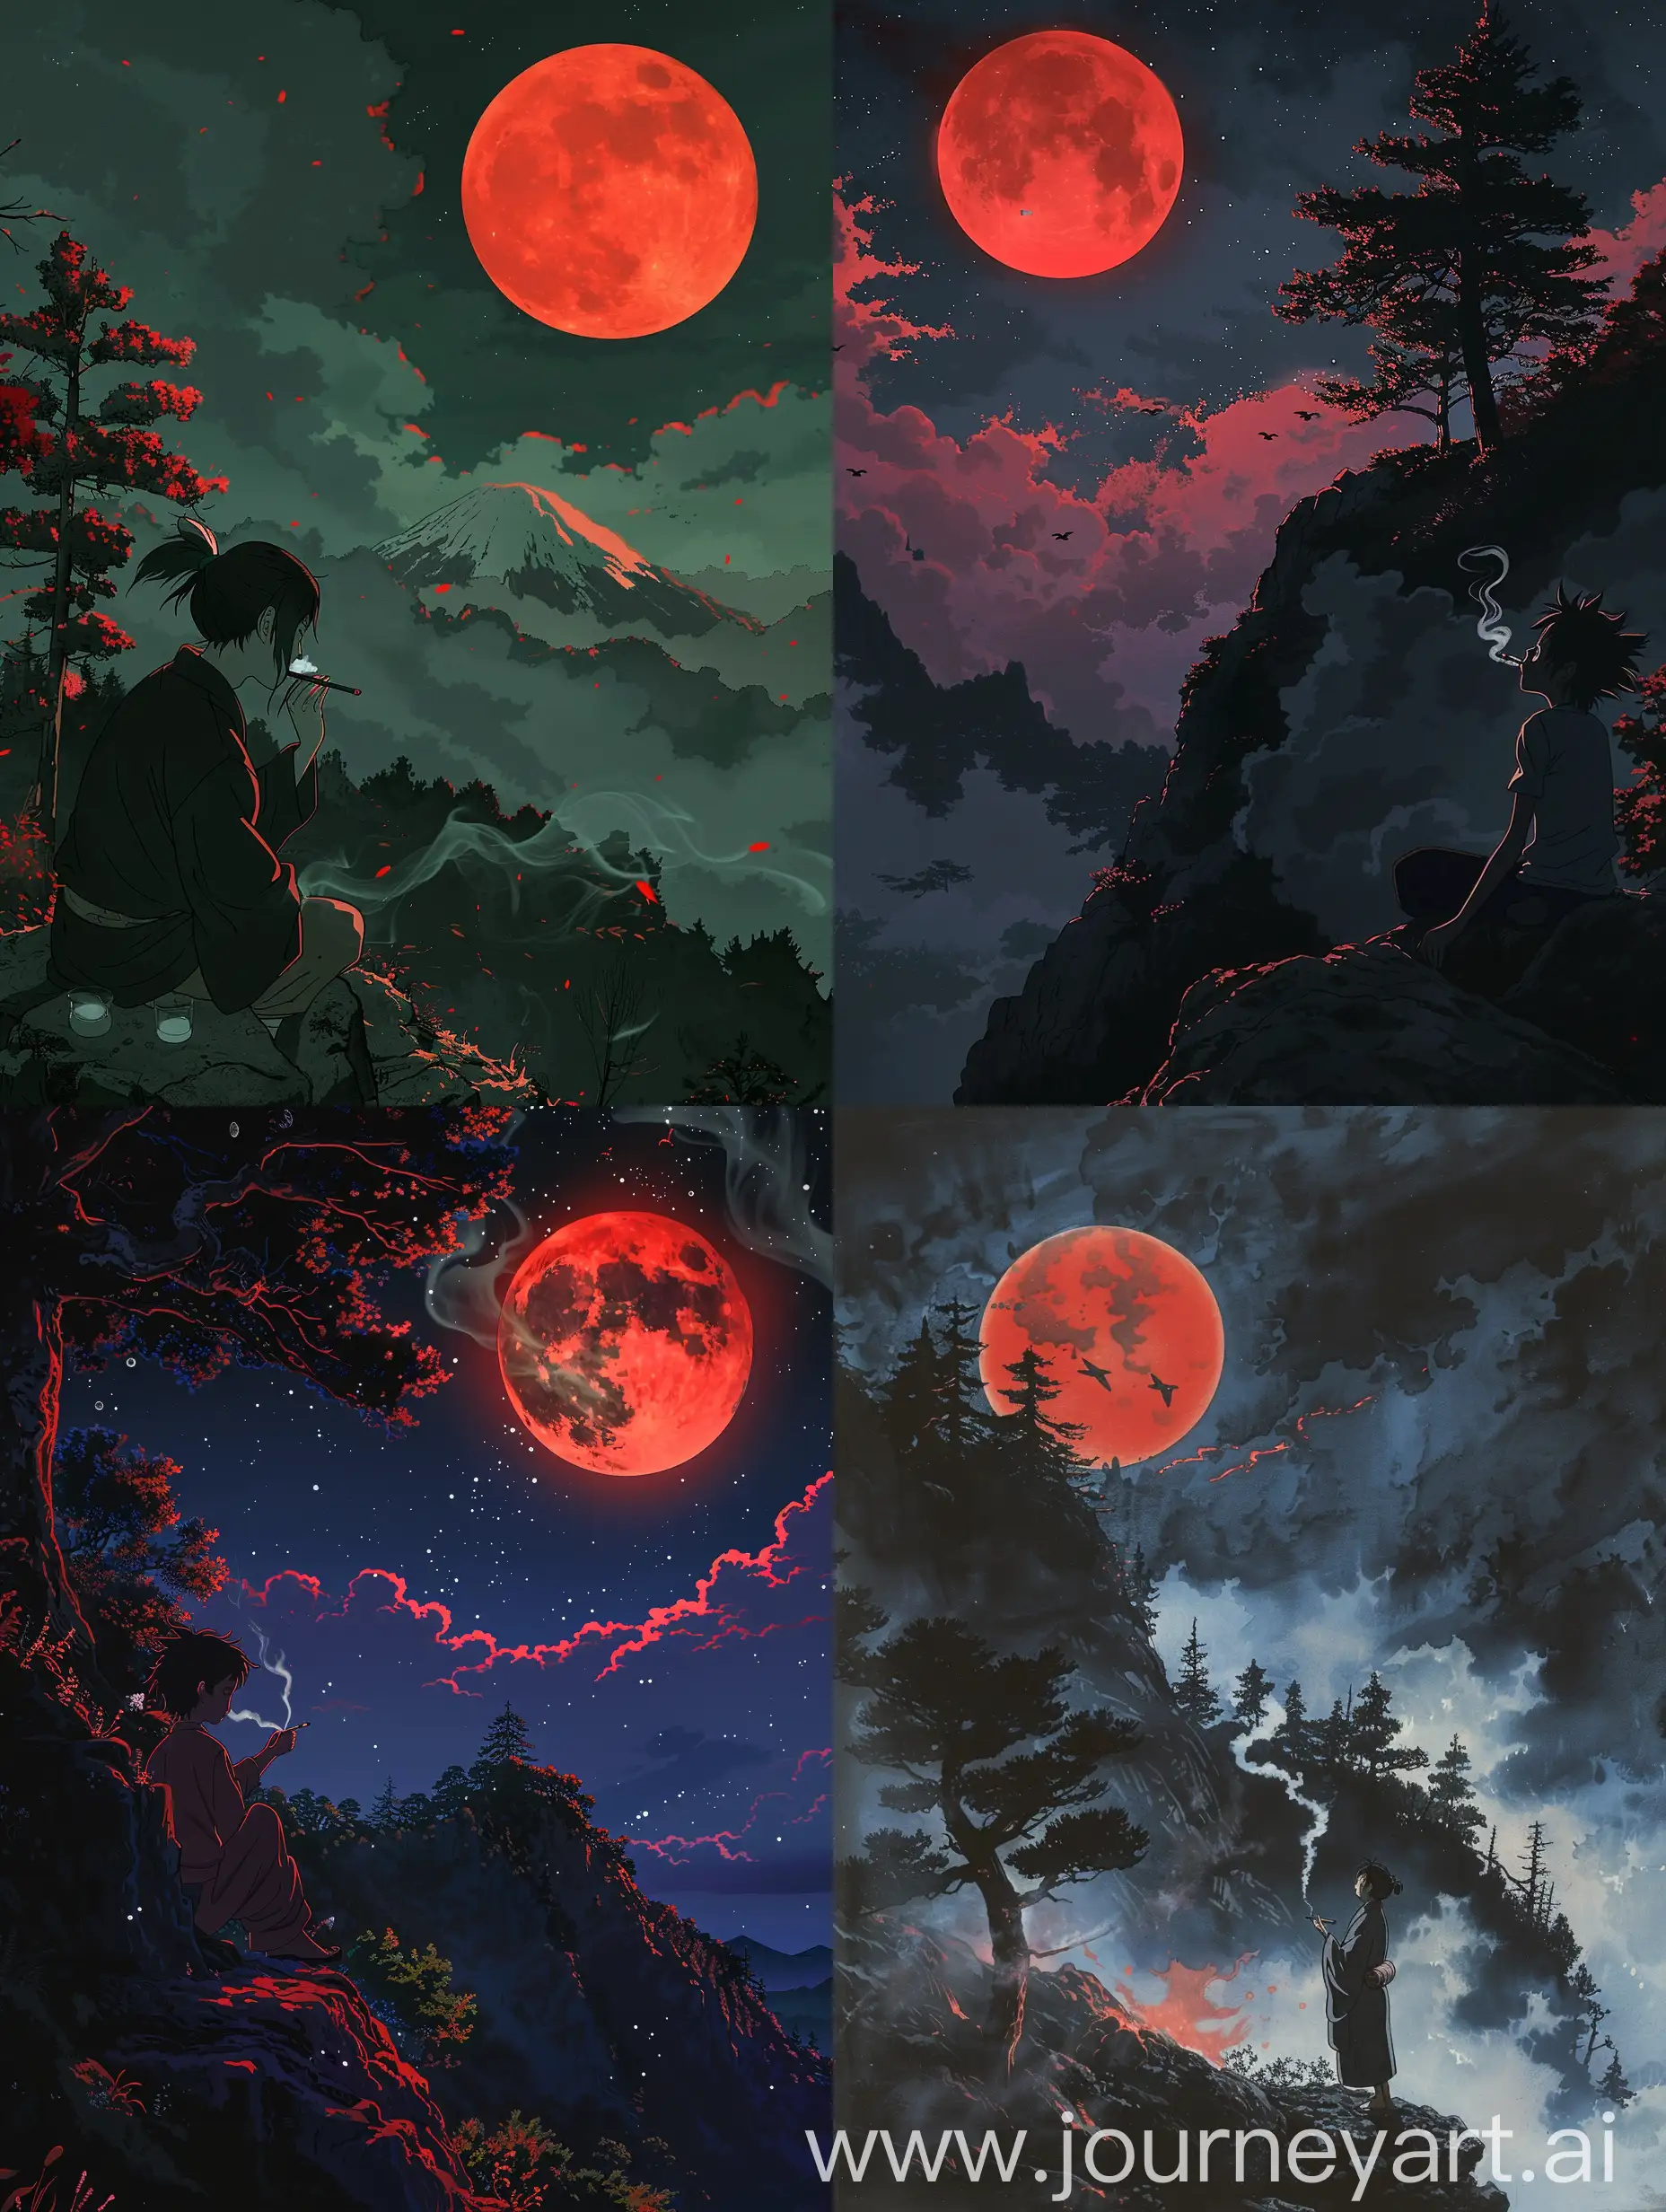 Anime-Character-Smoking-on-Mountain-at-Dark-Night-with-Red-Moon-Studio-Ghibli-Inspired